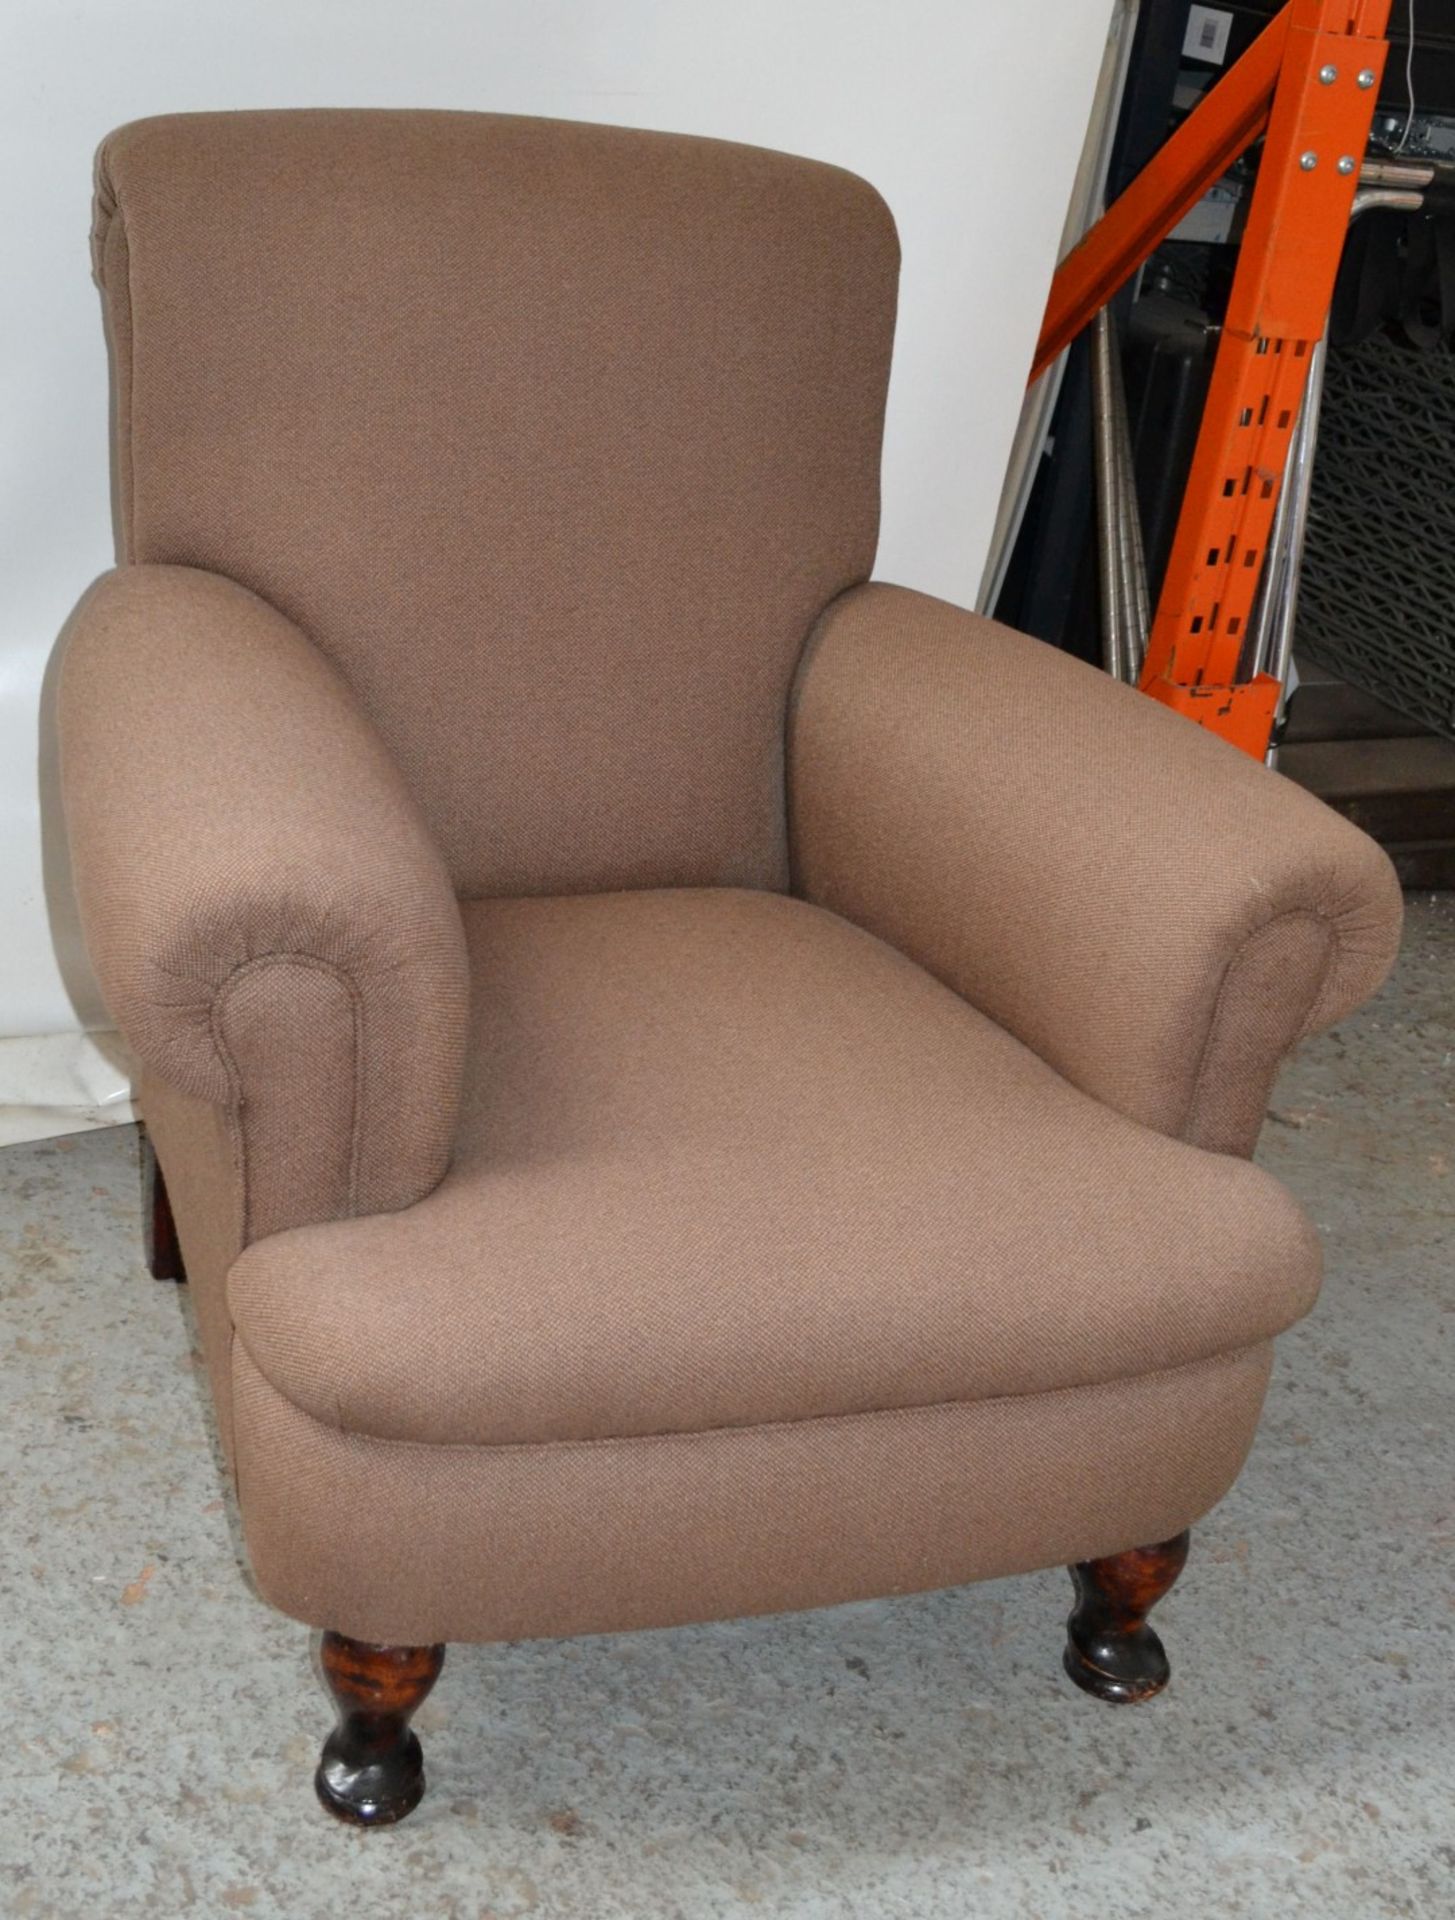 1 x Attractive Brown Fabric Armchair With Wooden Legs - CL314 - Location: Altrincham WA14 - *NO VAT - Image 10 of 13